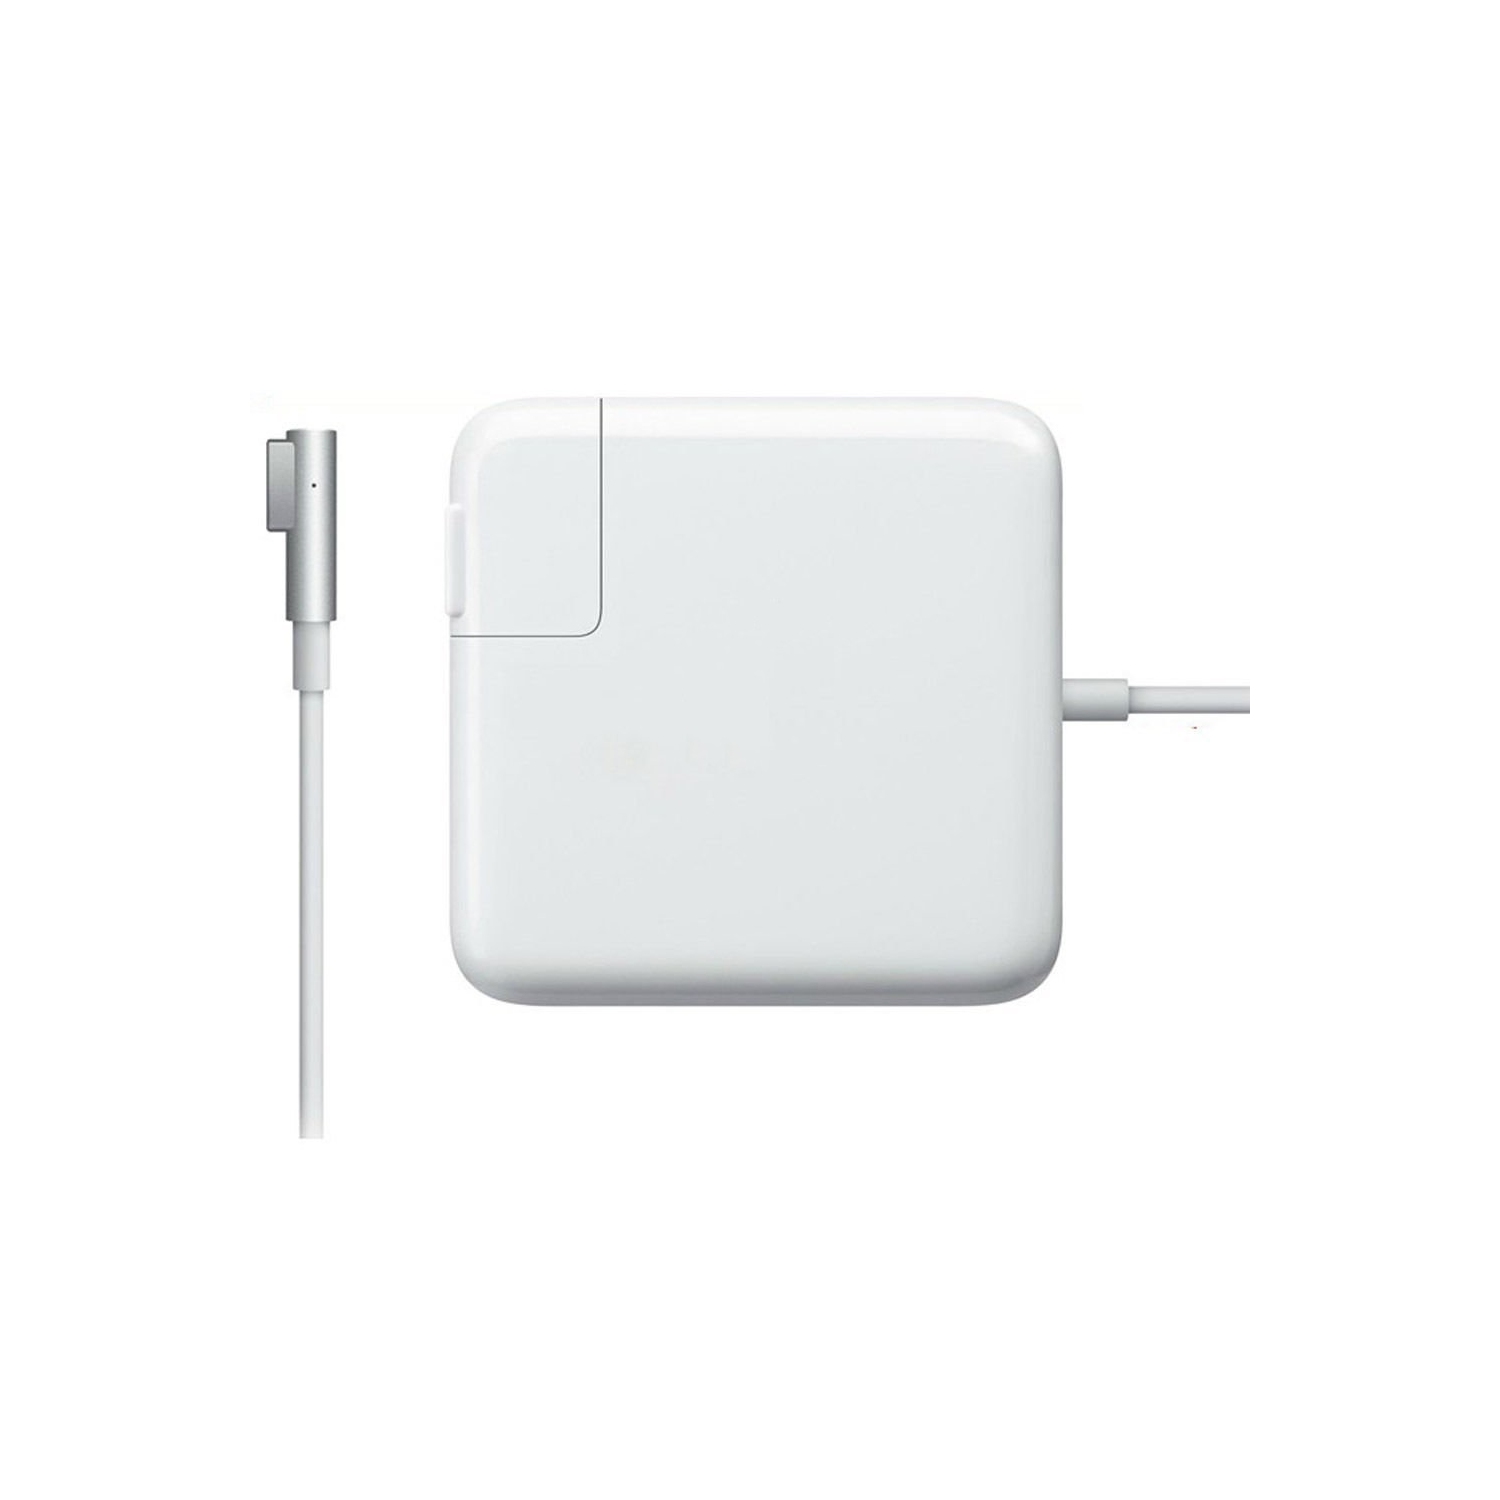 HYFAI 60W Power Adapter Charger New Compatible for Apple MagSafe Macbook Pro L Tip A1278 A1344 A1181 A1184 16.5V 3.65A